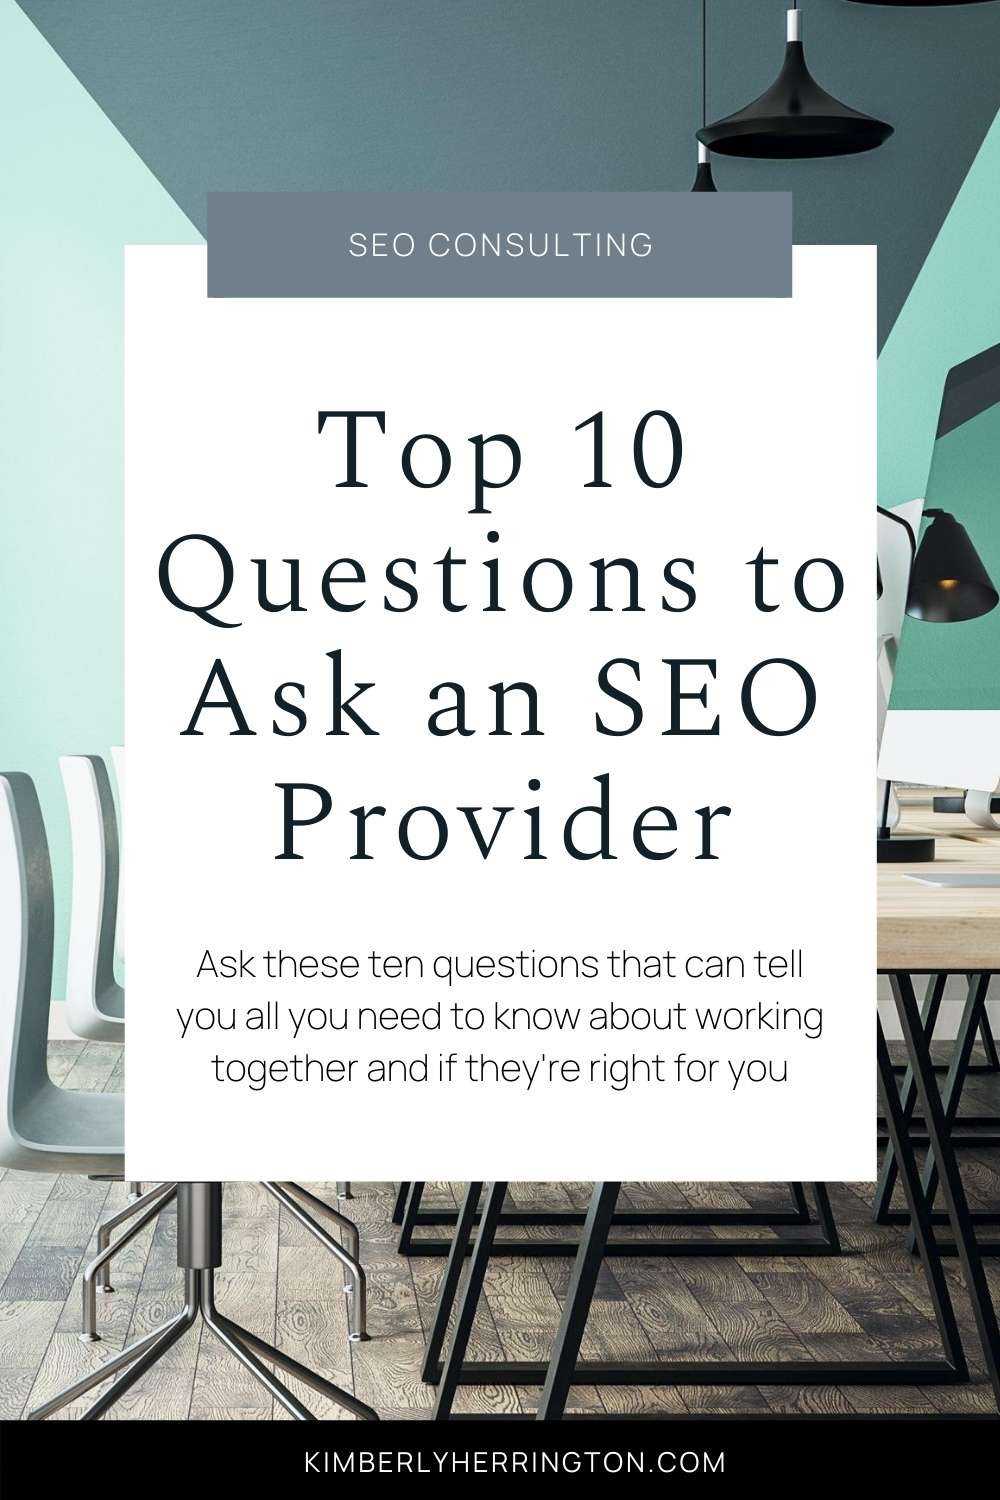 Questions to Ask SEO Provider